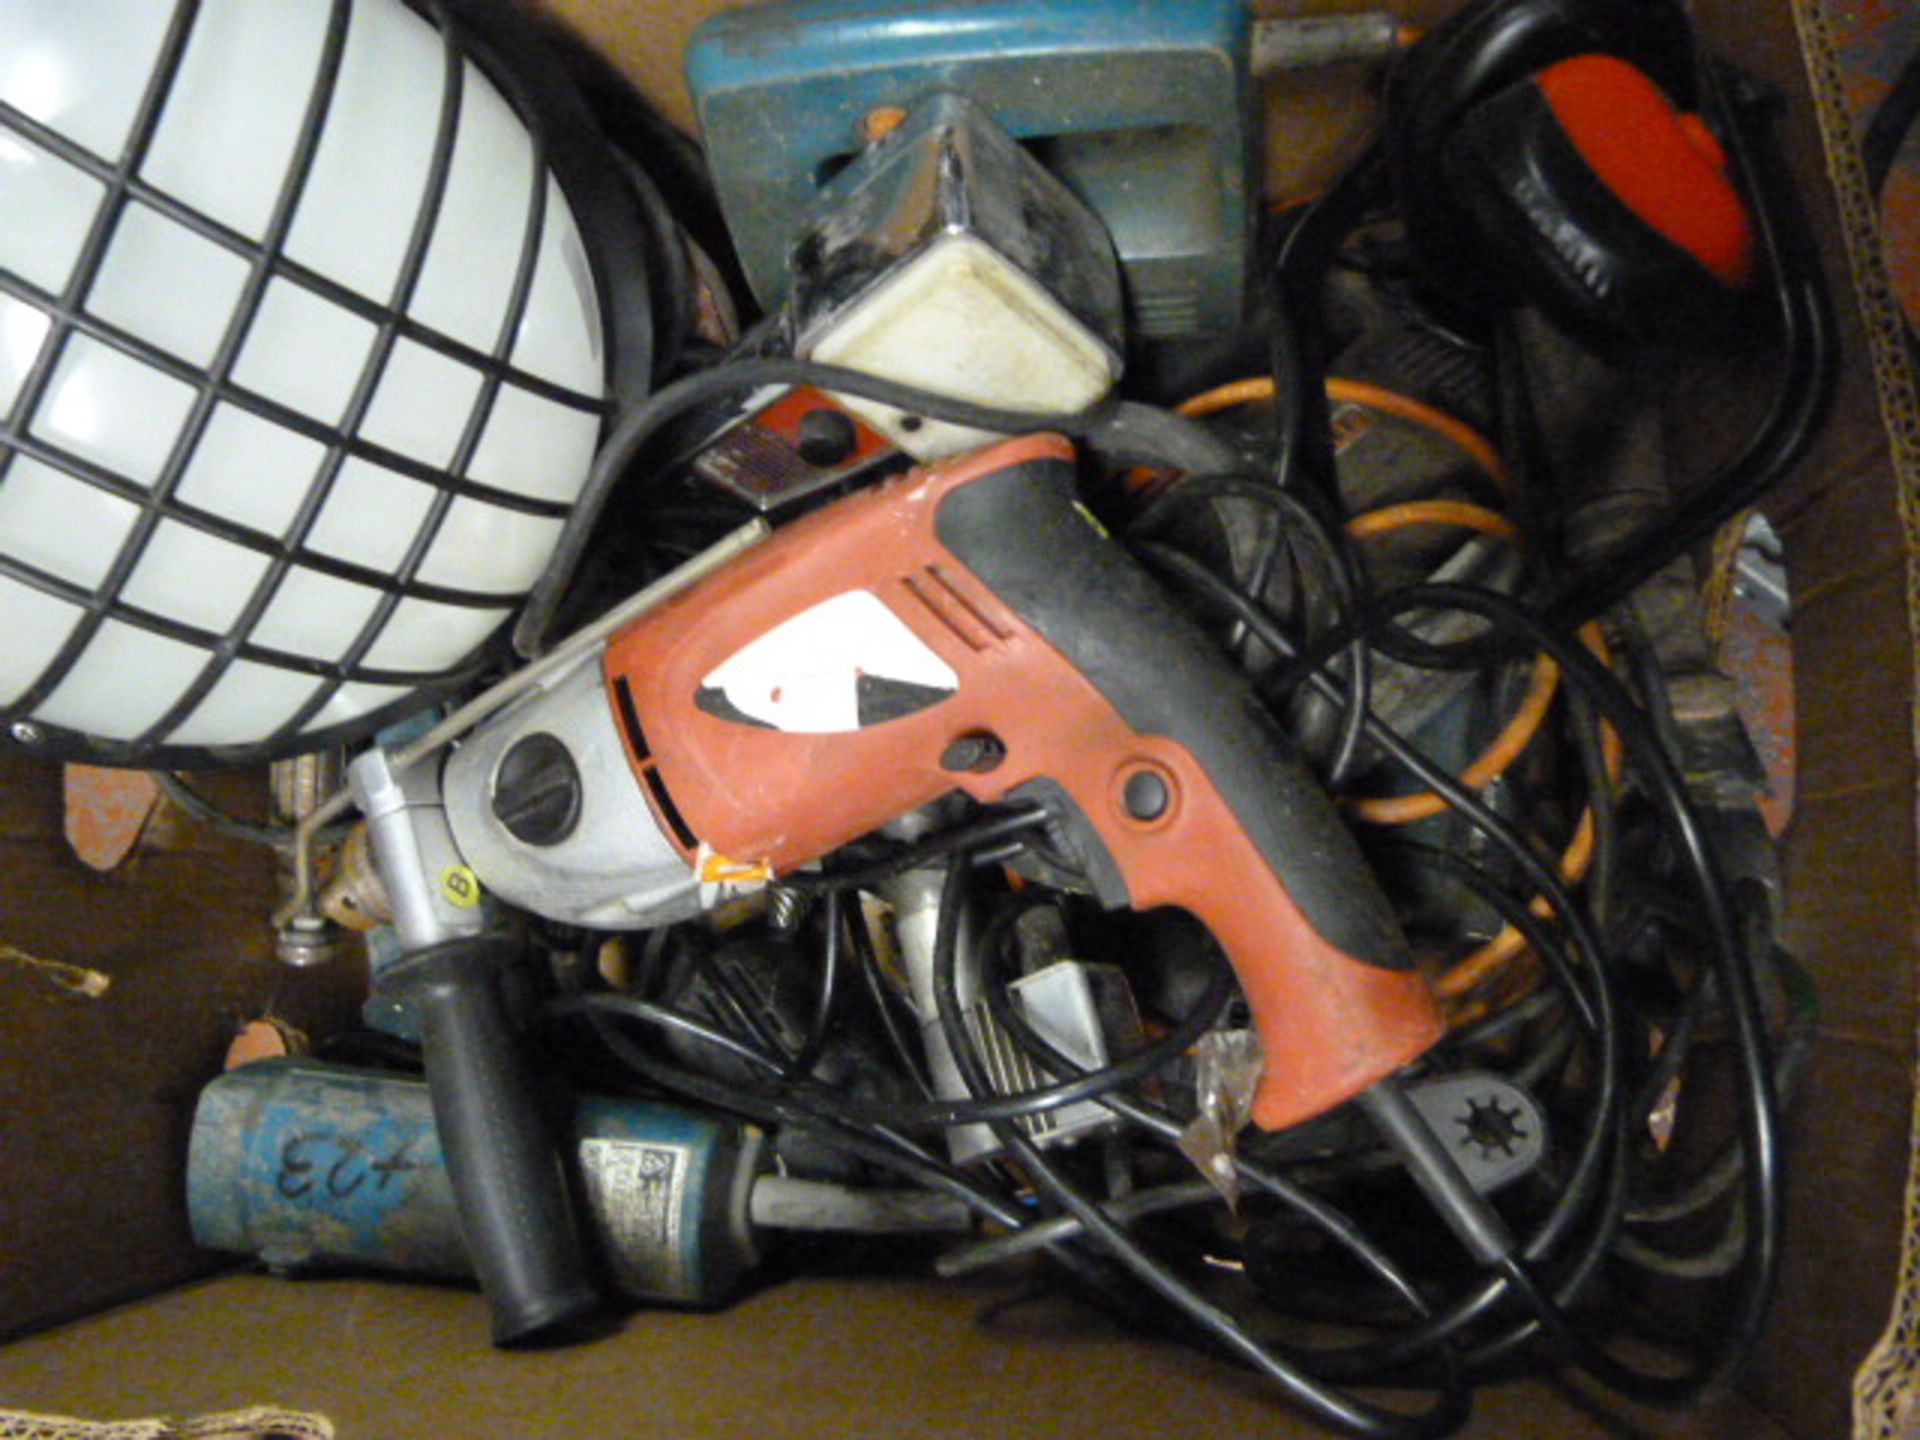 Box of Tools Including Drills, Jigsaws, Exhaust An